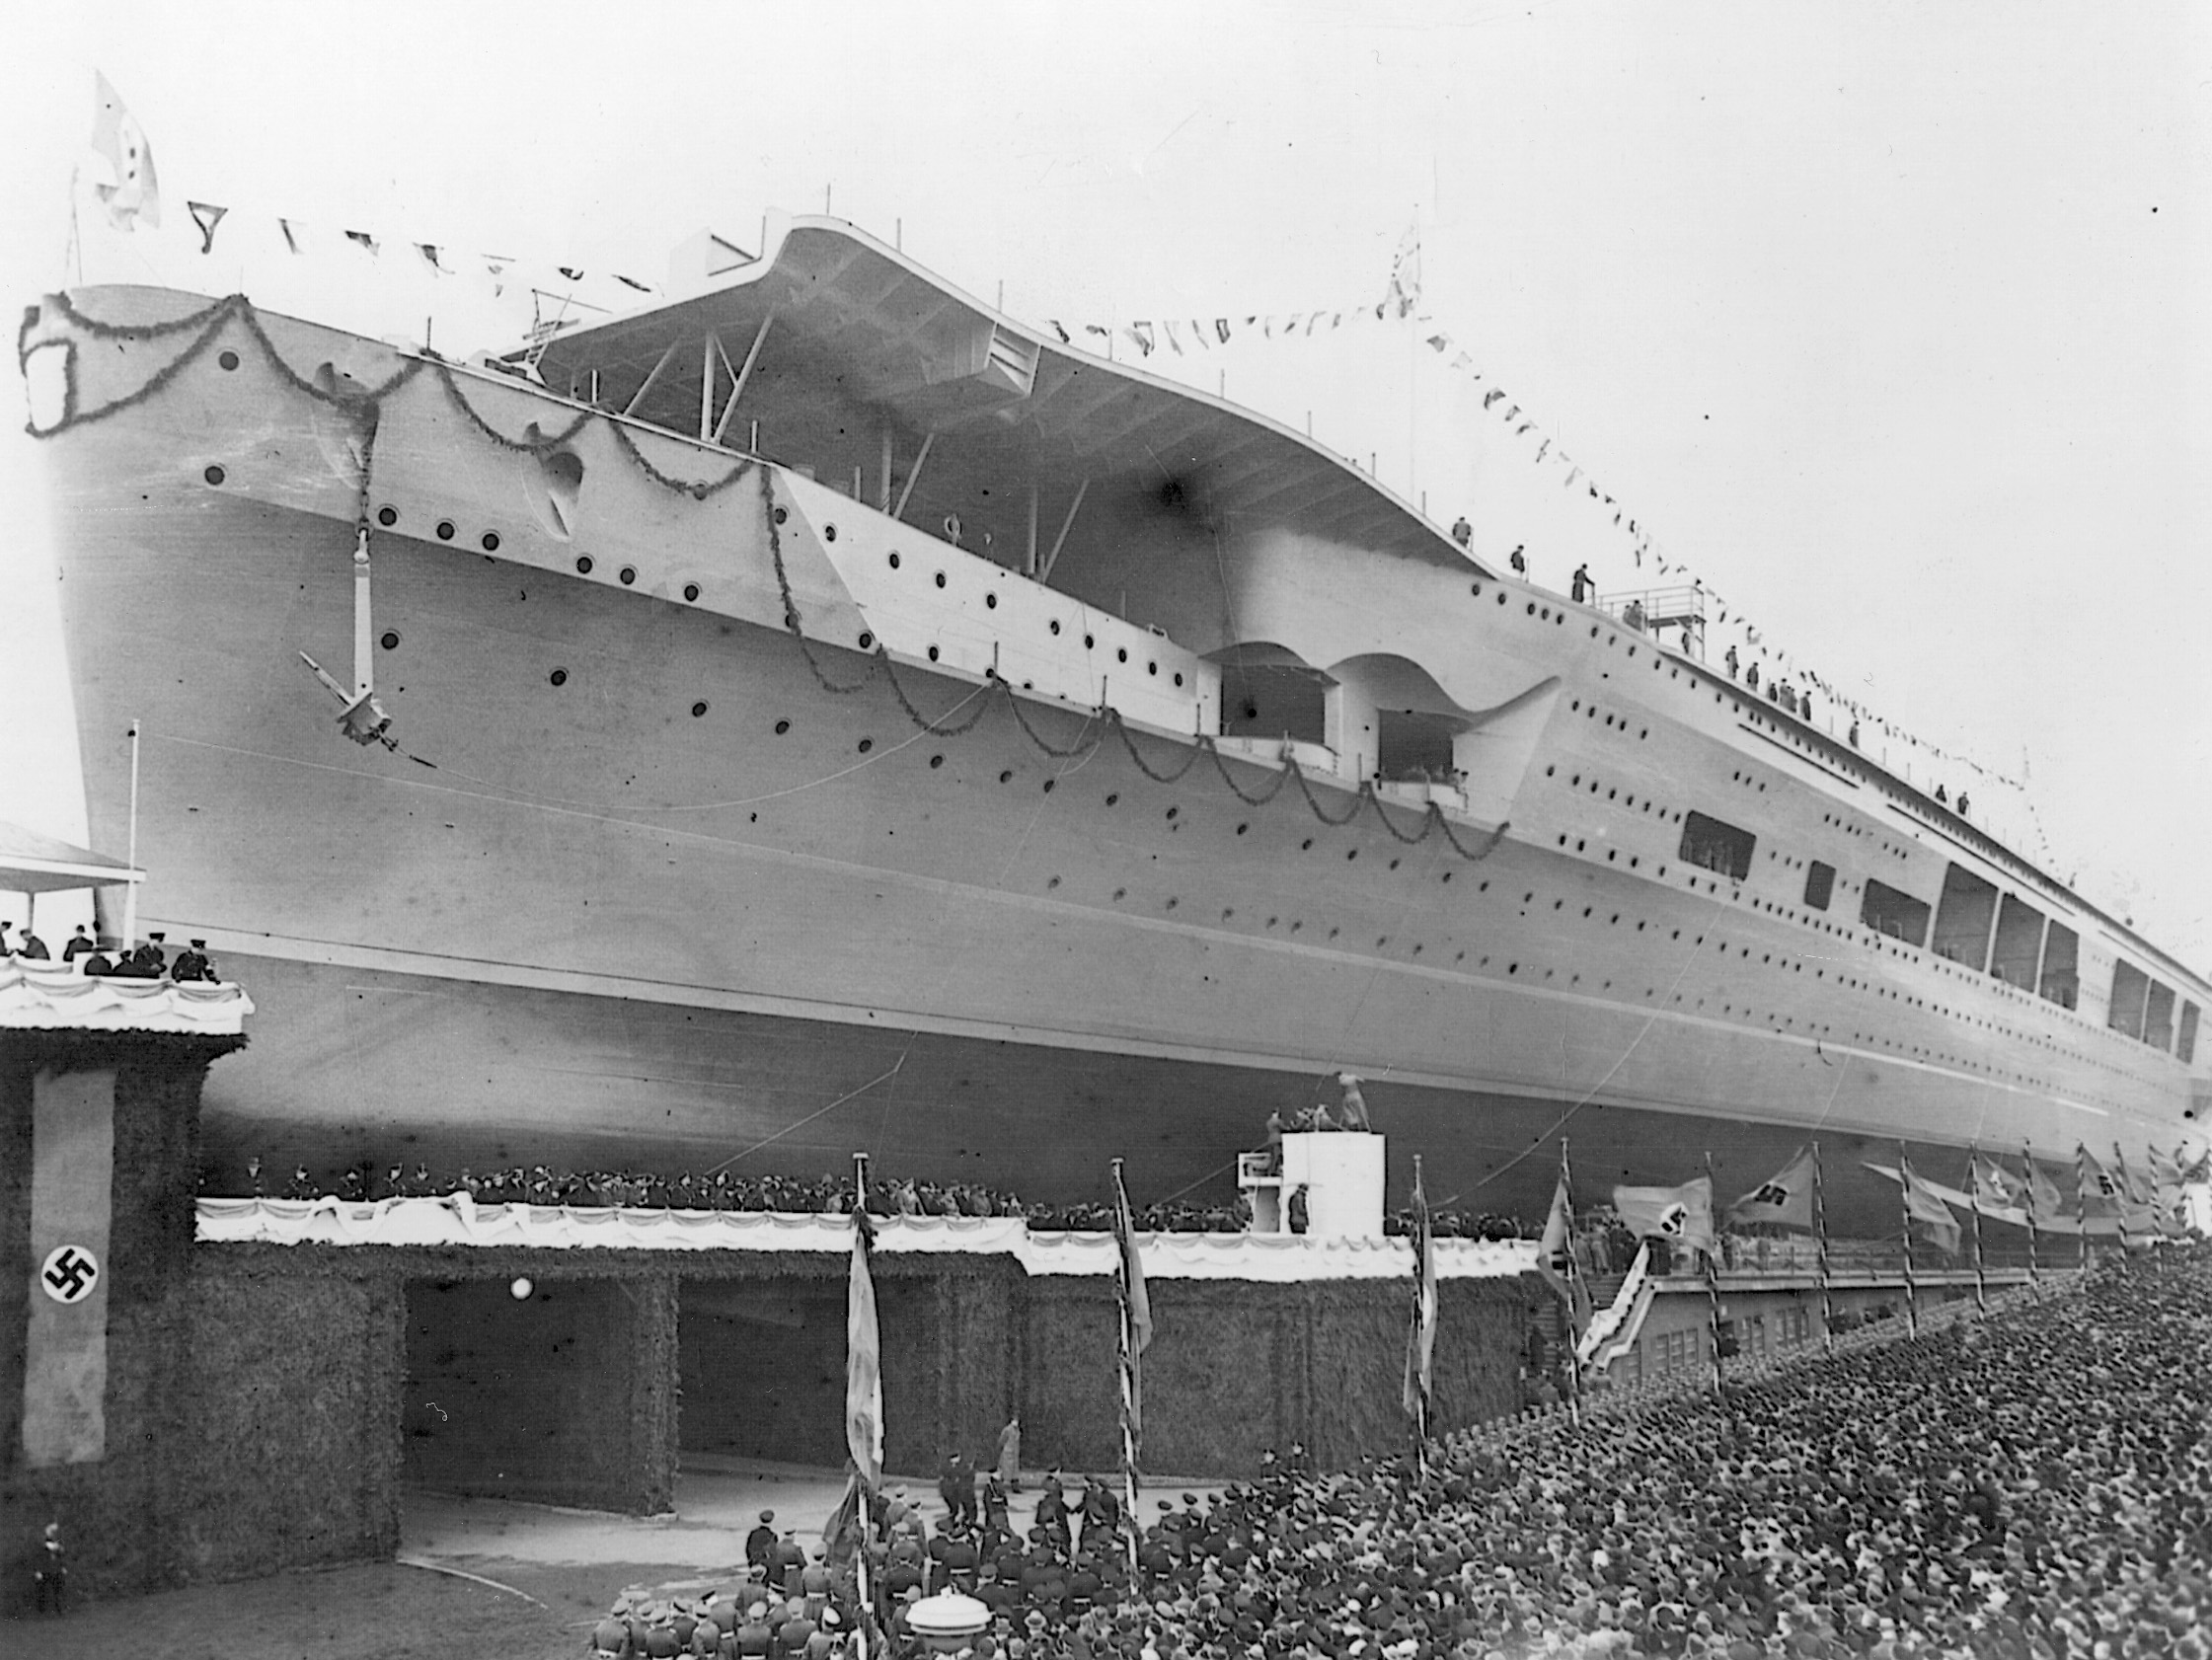 Crowds gather for the ceremony to launch aircraft carrier Graf Zeppelin at Kiel on December 8, 1938.